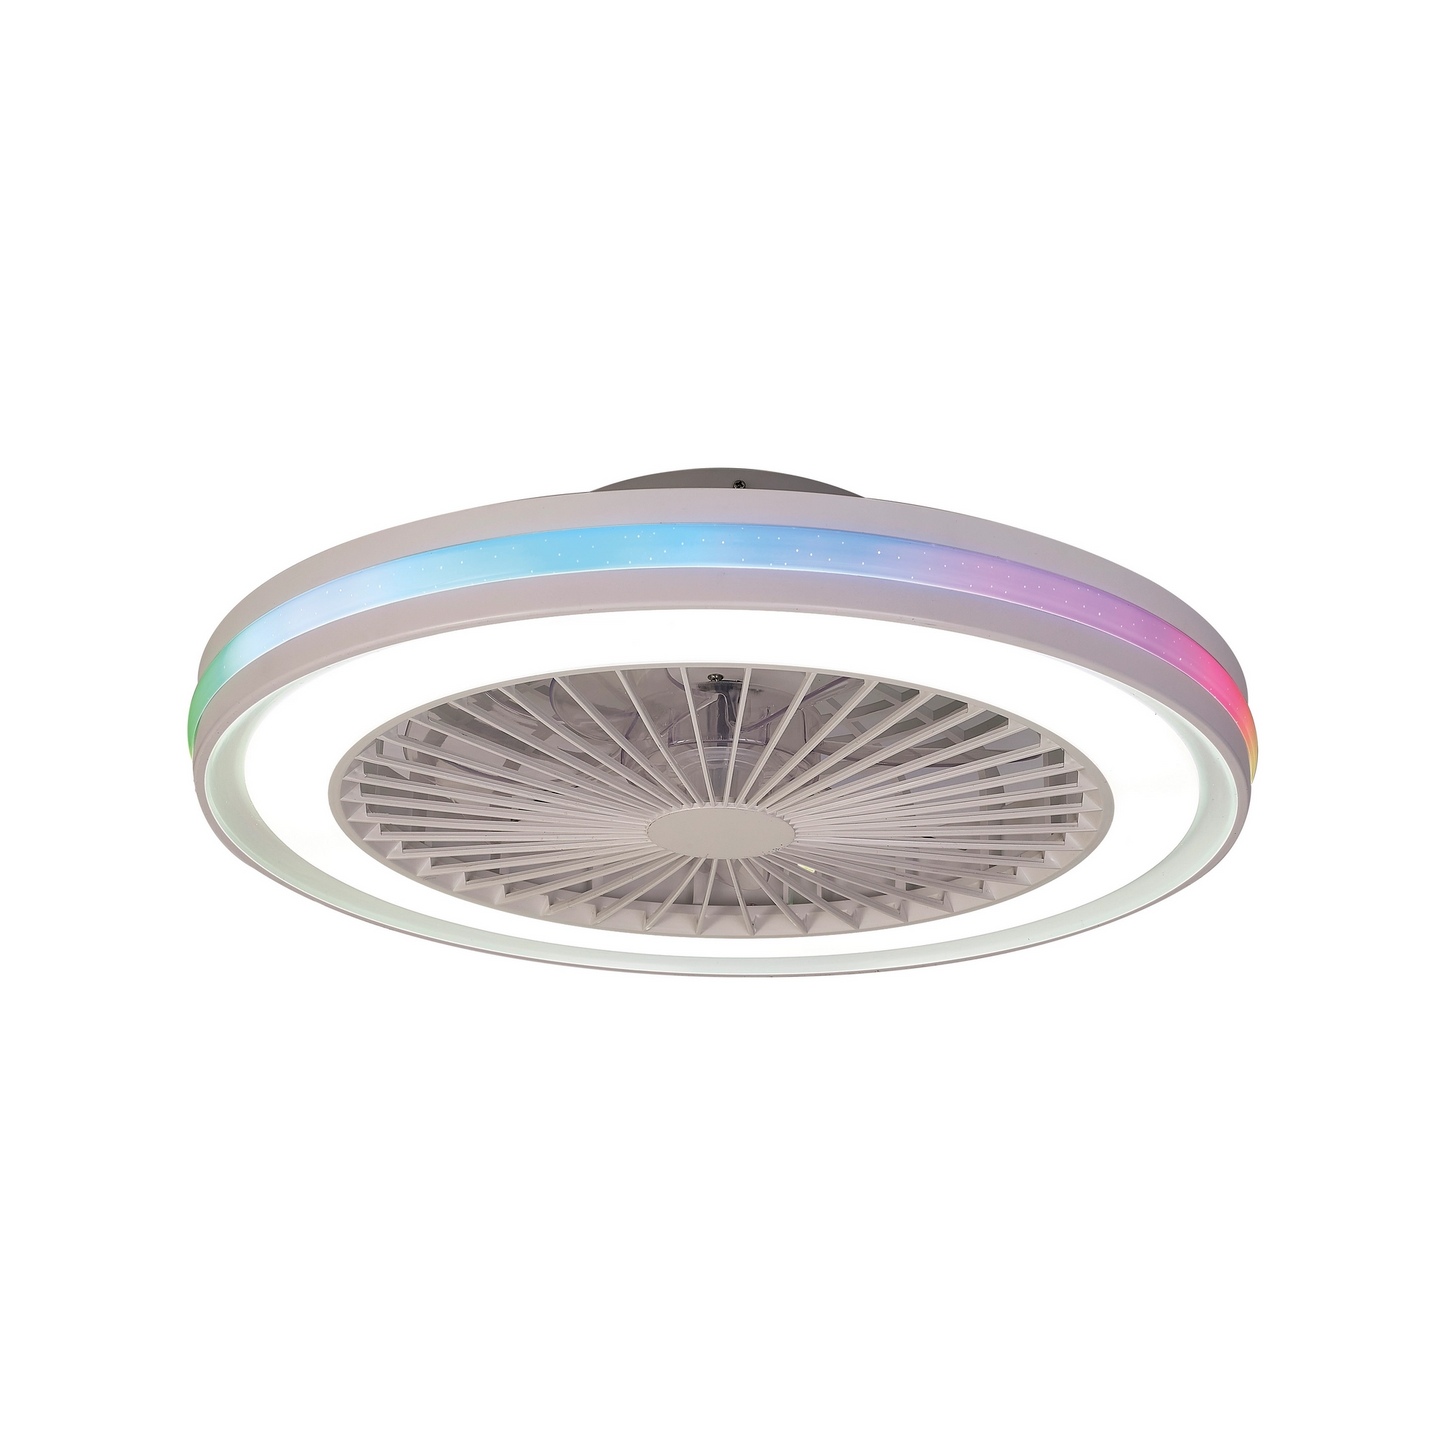 Gamer LED Dimmable Ceiling Light With Built-In Fan - Remote Control